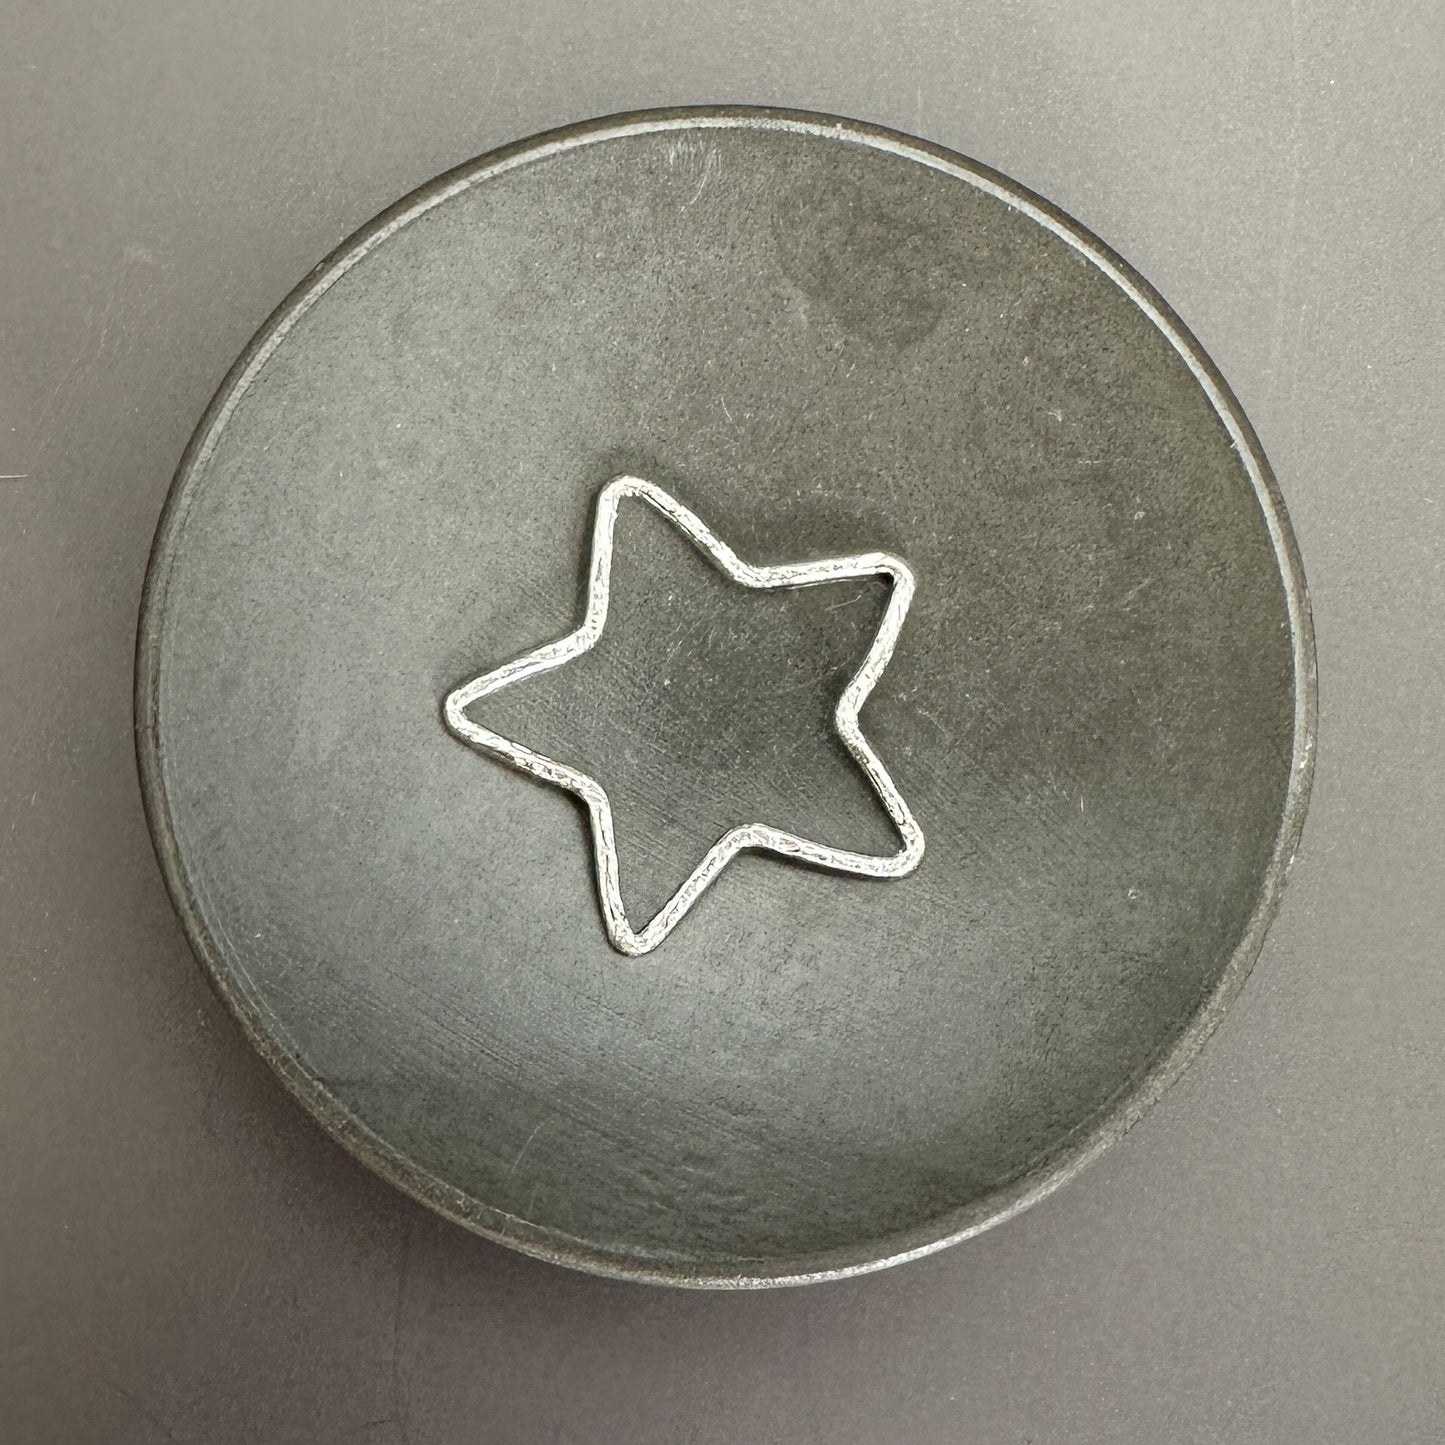 Handmade Pure Silver Star Pendant 218mm - Hammered Finish, Artisan Crafted, Silver Star Charm for Jewelry Making - 1 pc. (M1933)